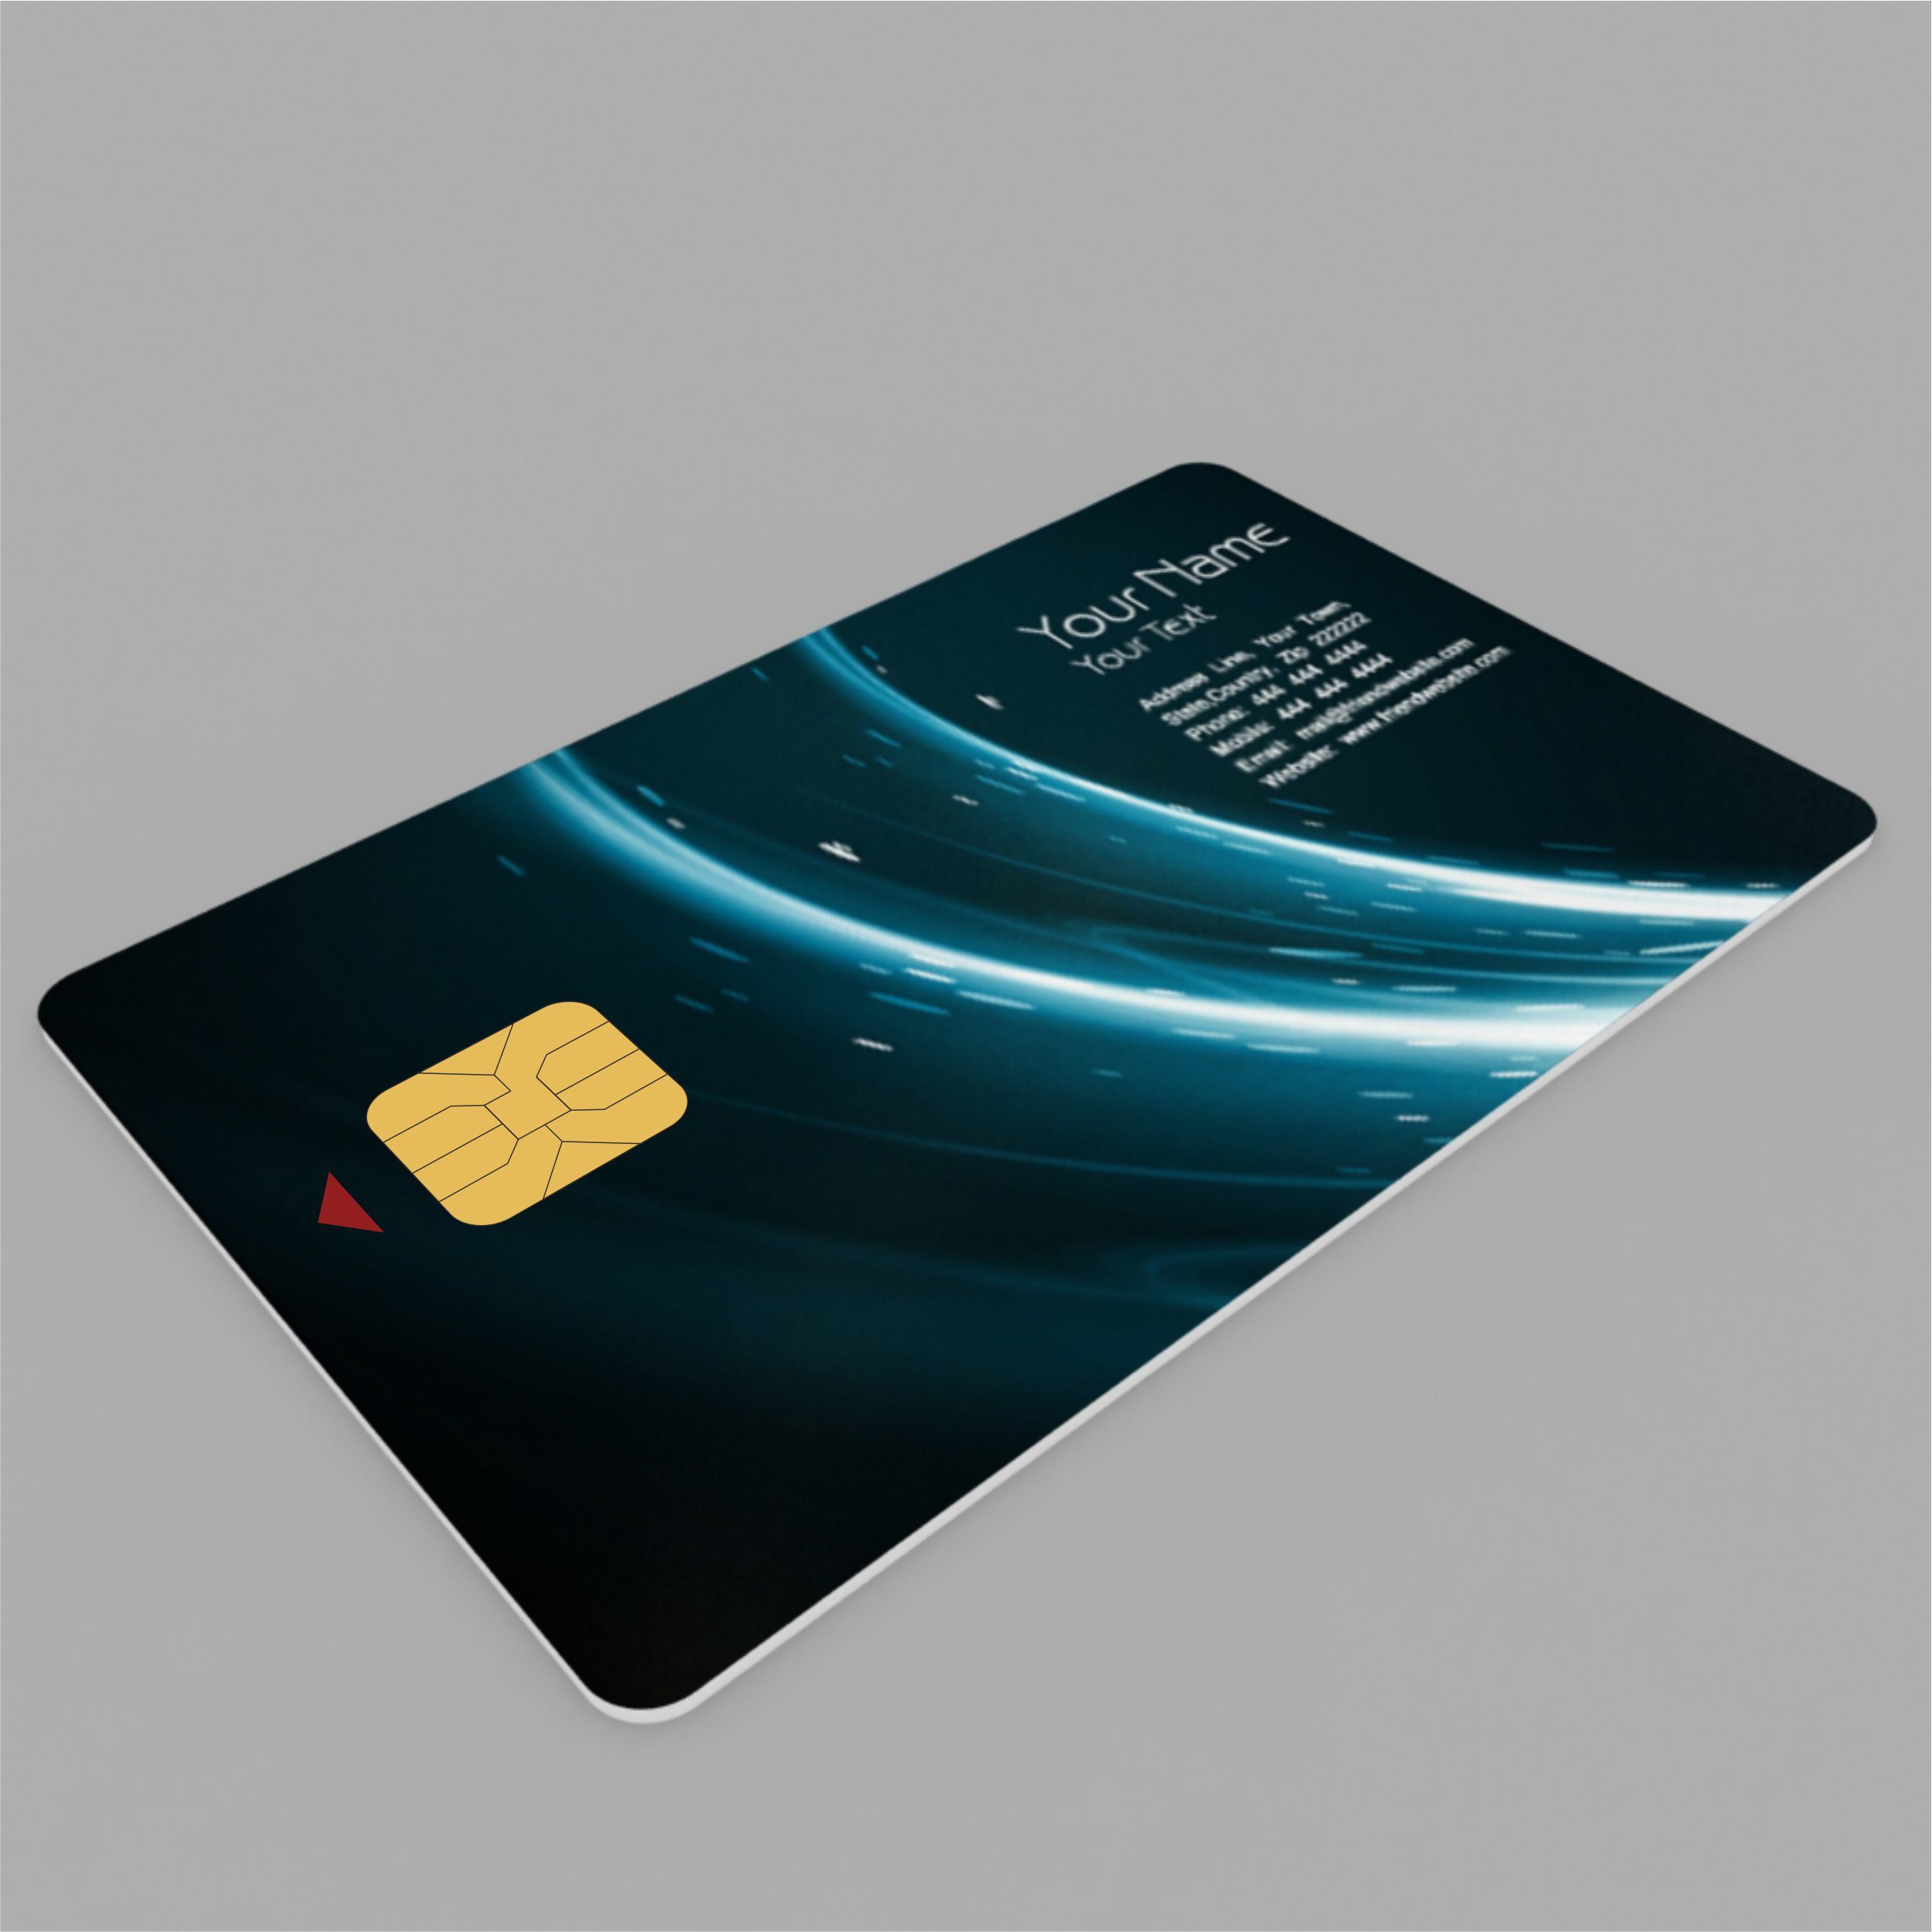 ISO7816 Contact IC Card Smart Card